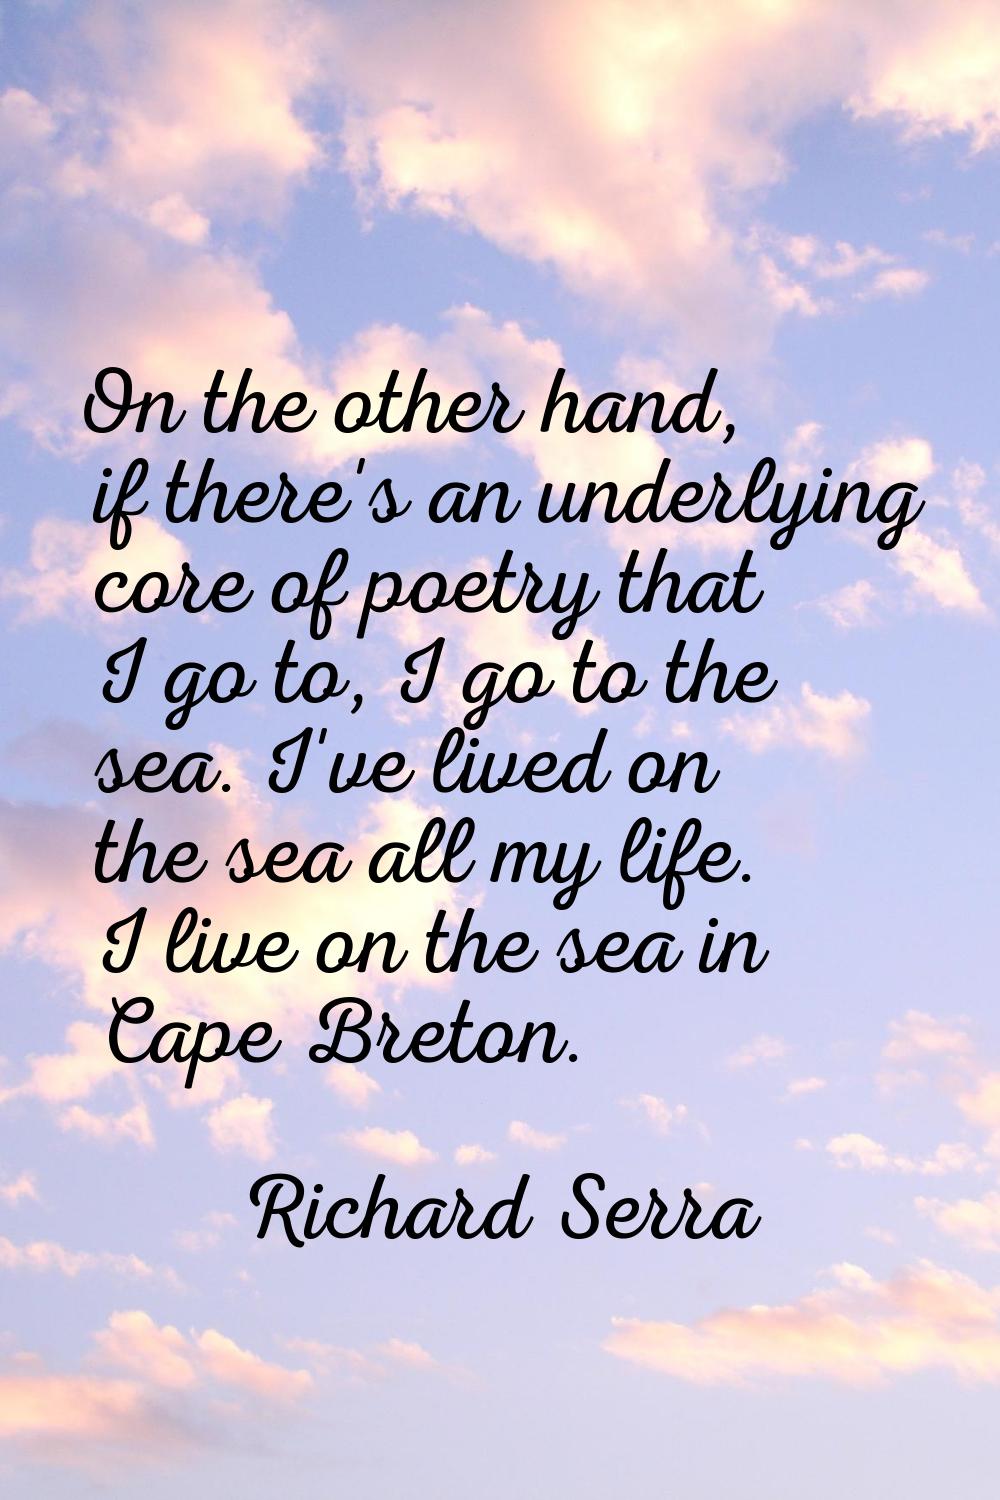 On the other hand, if there's an underlying core of poetry that I go to, I go to the sea. I've live